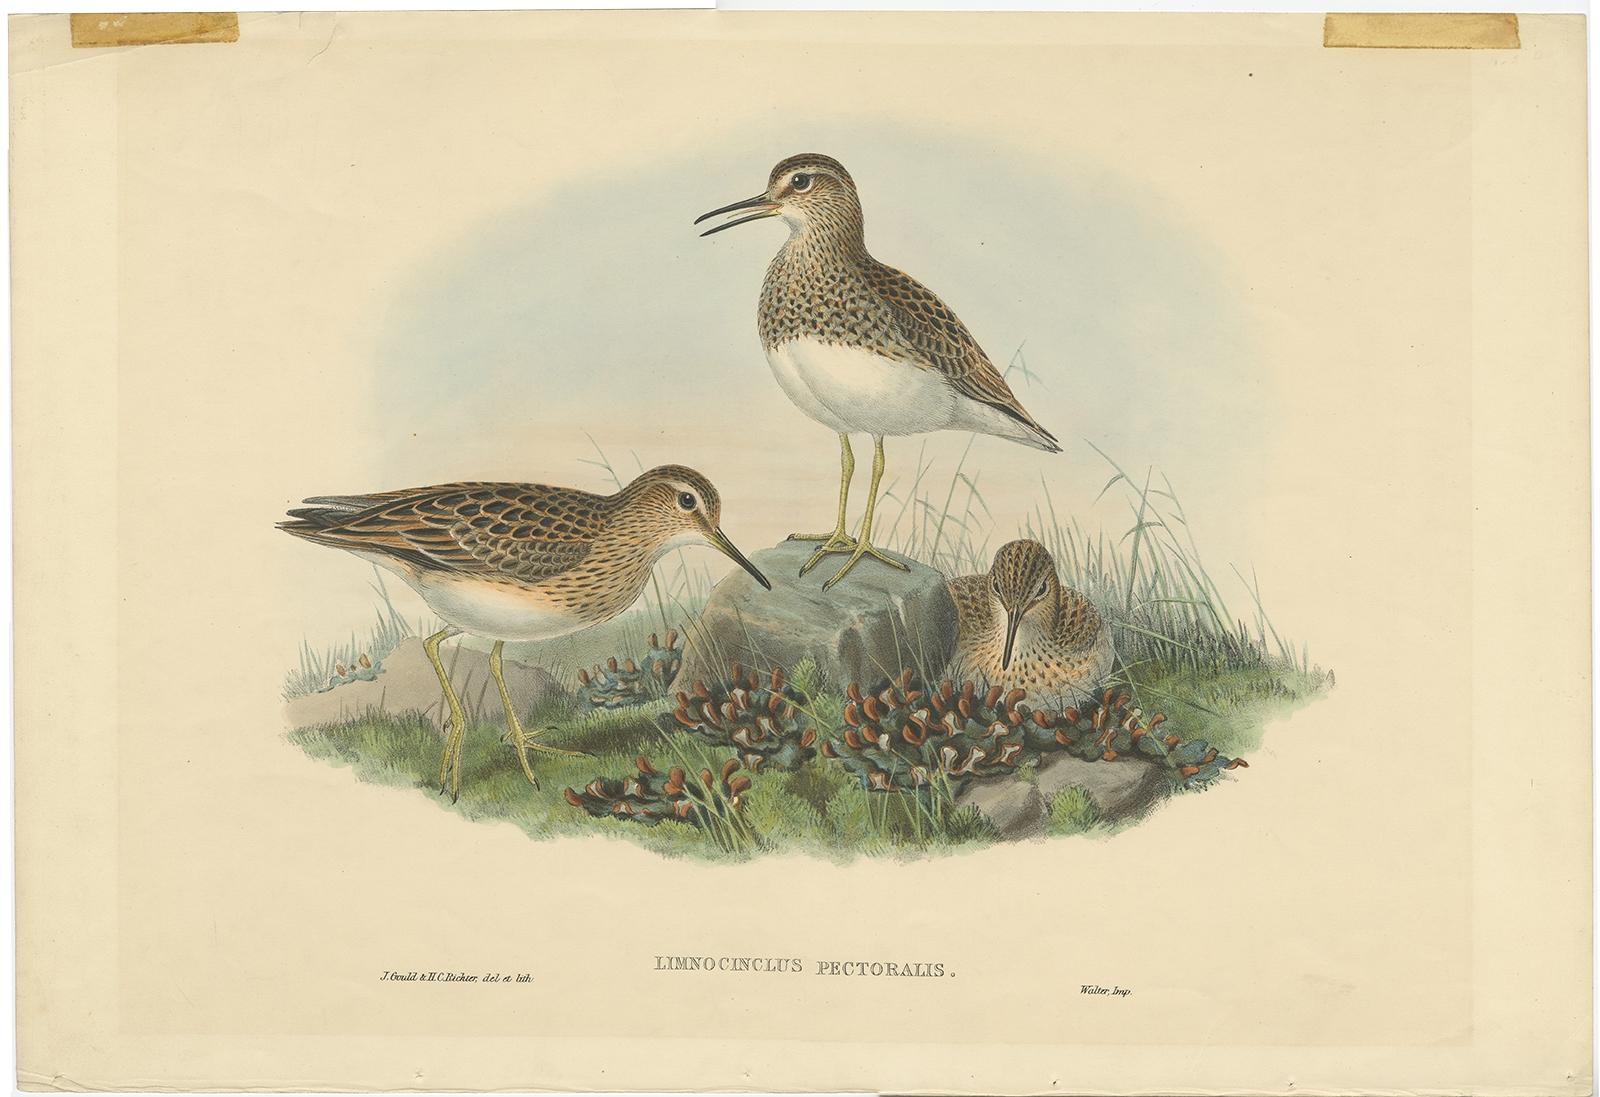 Antique bird print titled 'Limnocinclus Pectoralis'. This print depicts the pectoral sandpiper. Originates from John Gould's 'The Birds of the Great Britain'. 

Artists and Engravers: John Gould (1804 - 1881) was an English ornithologist and bird